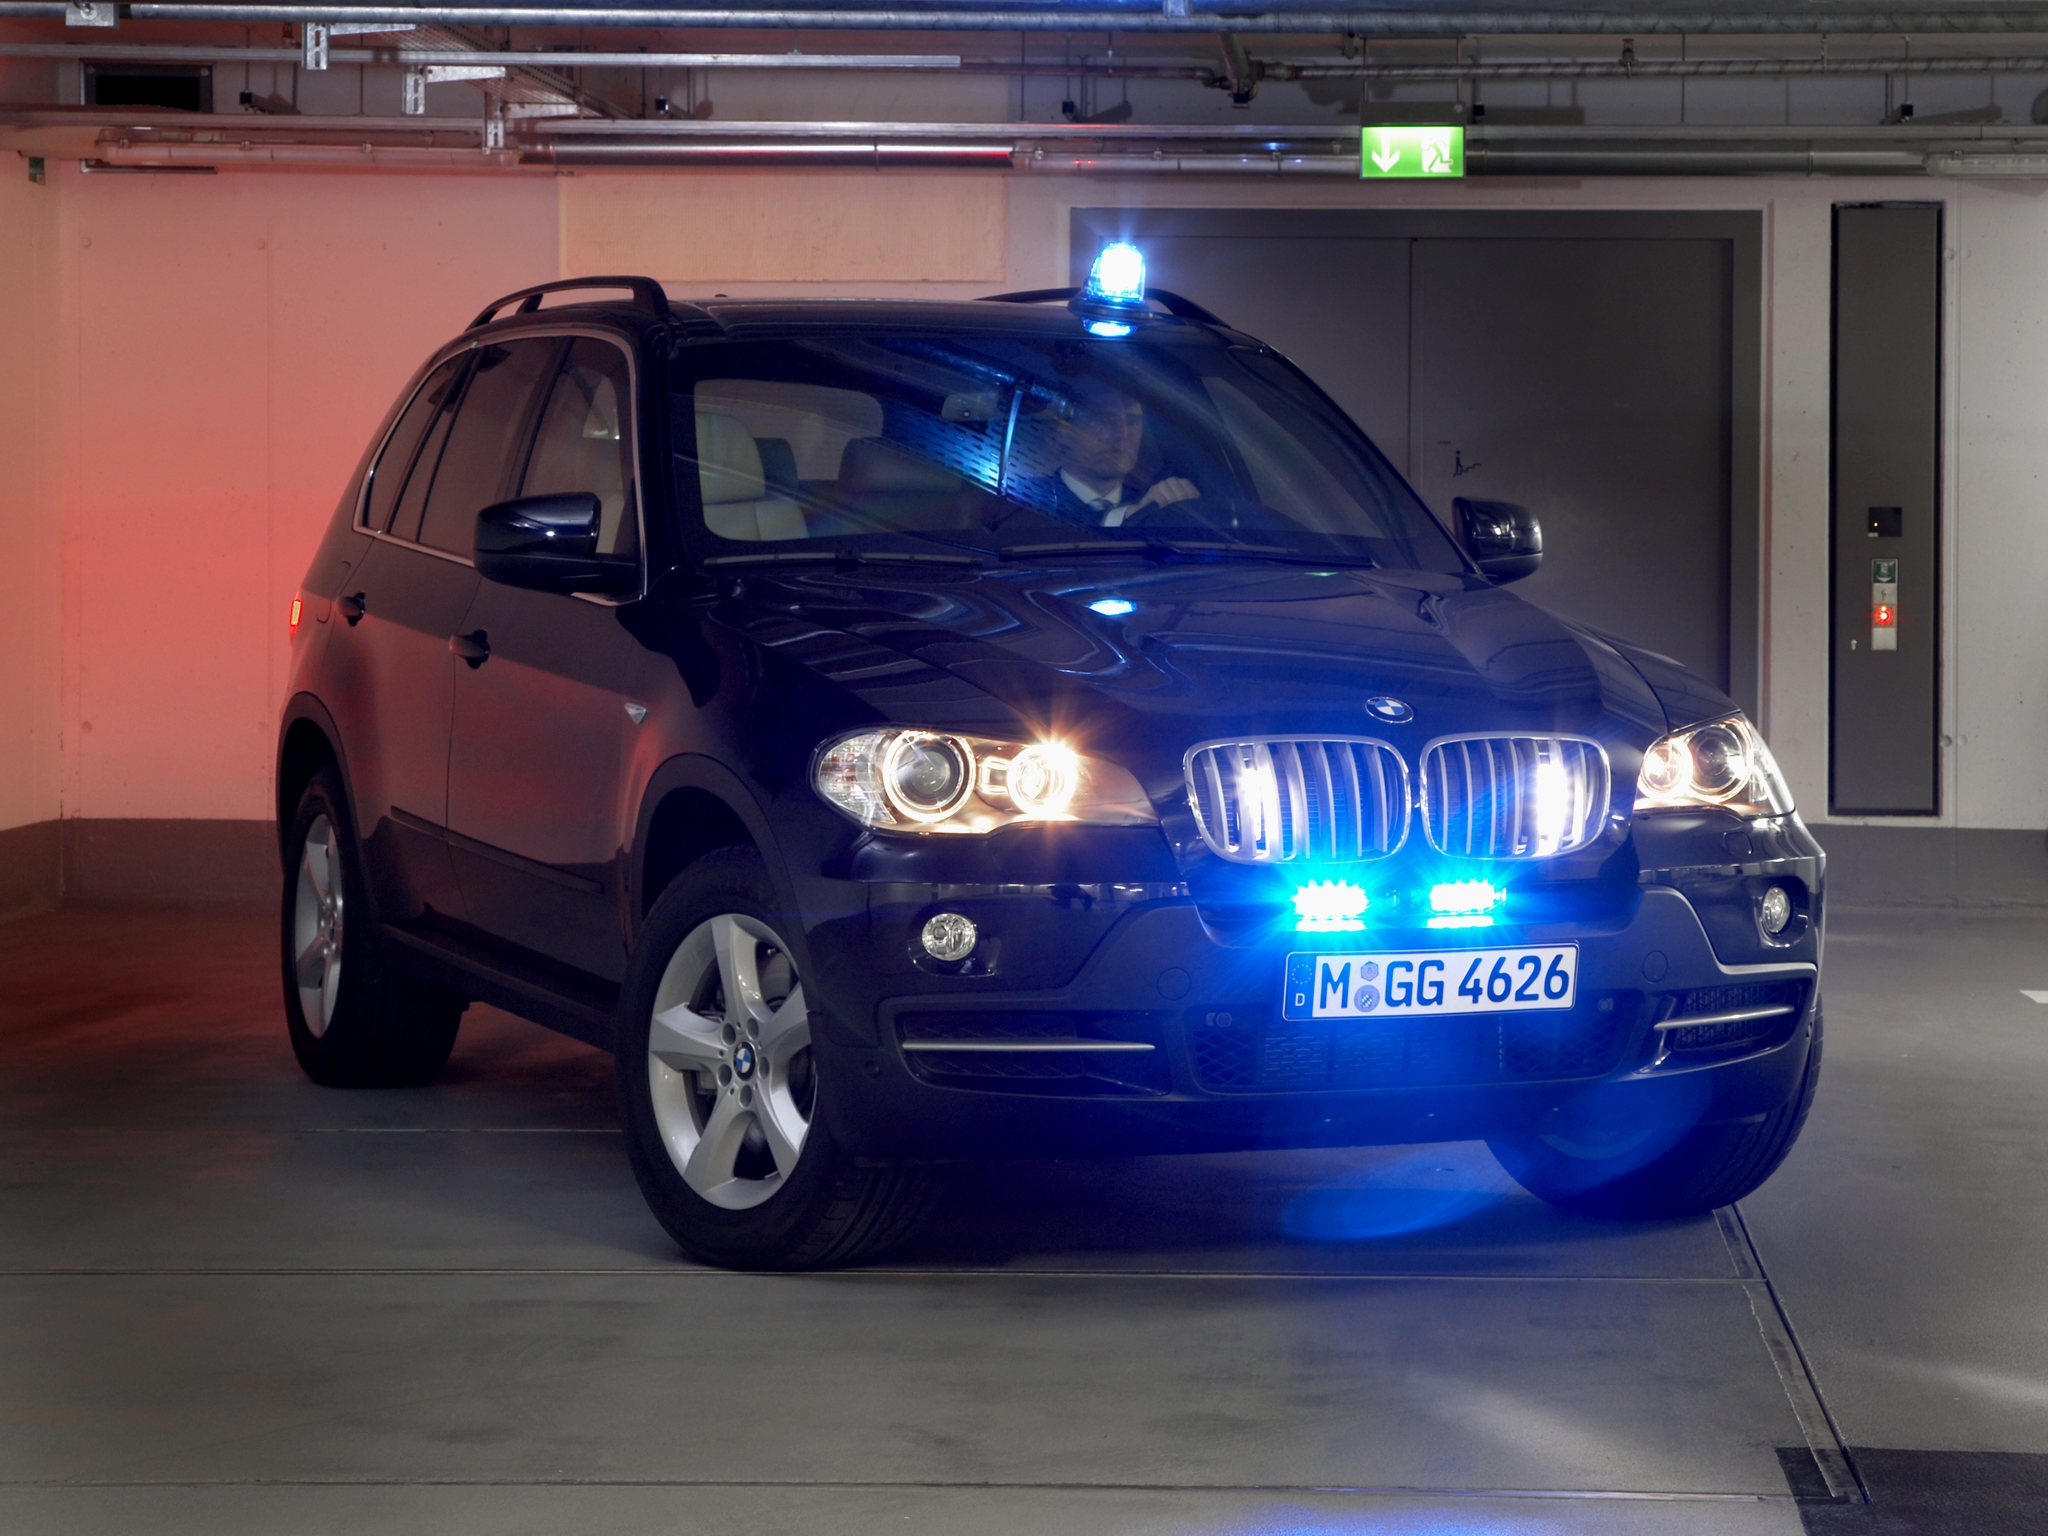 2009, Armored, Bmw, X 5, Security, Plus, E70, Suv, Police Wallpaper